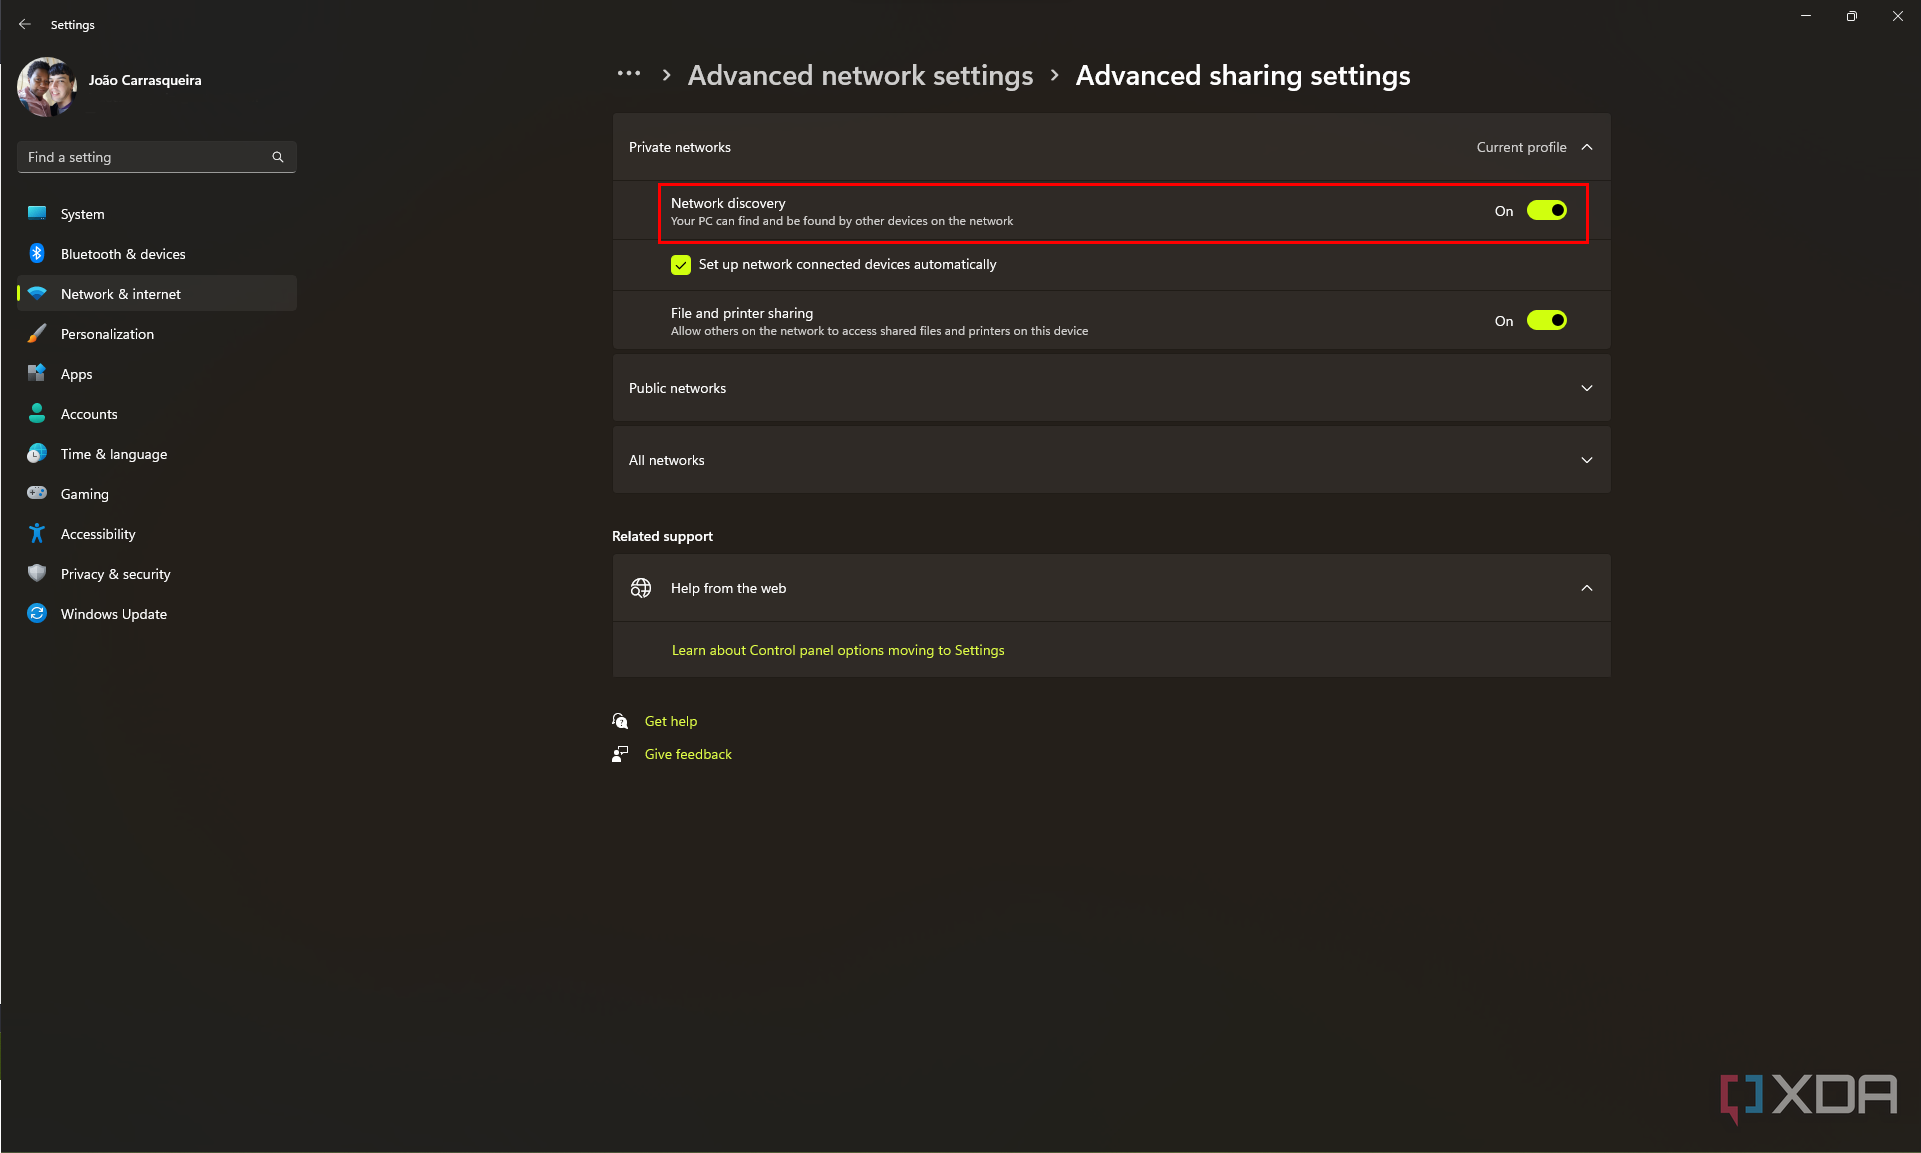 Screenshot of advanced sharing settings with Network discovery and file sharing enabled